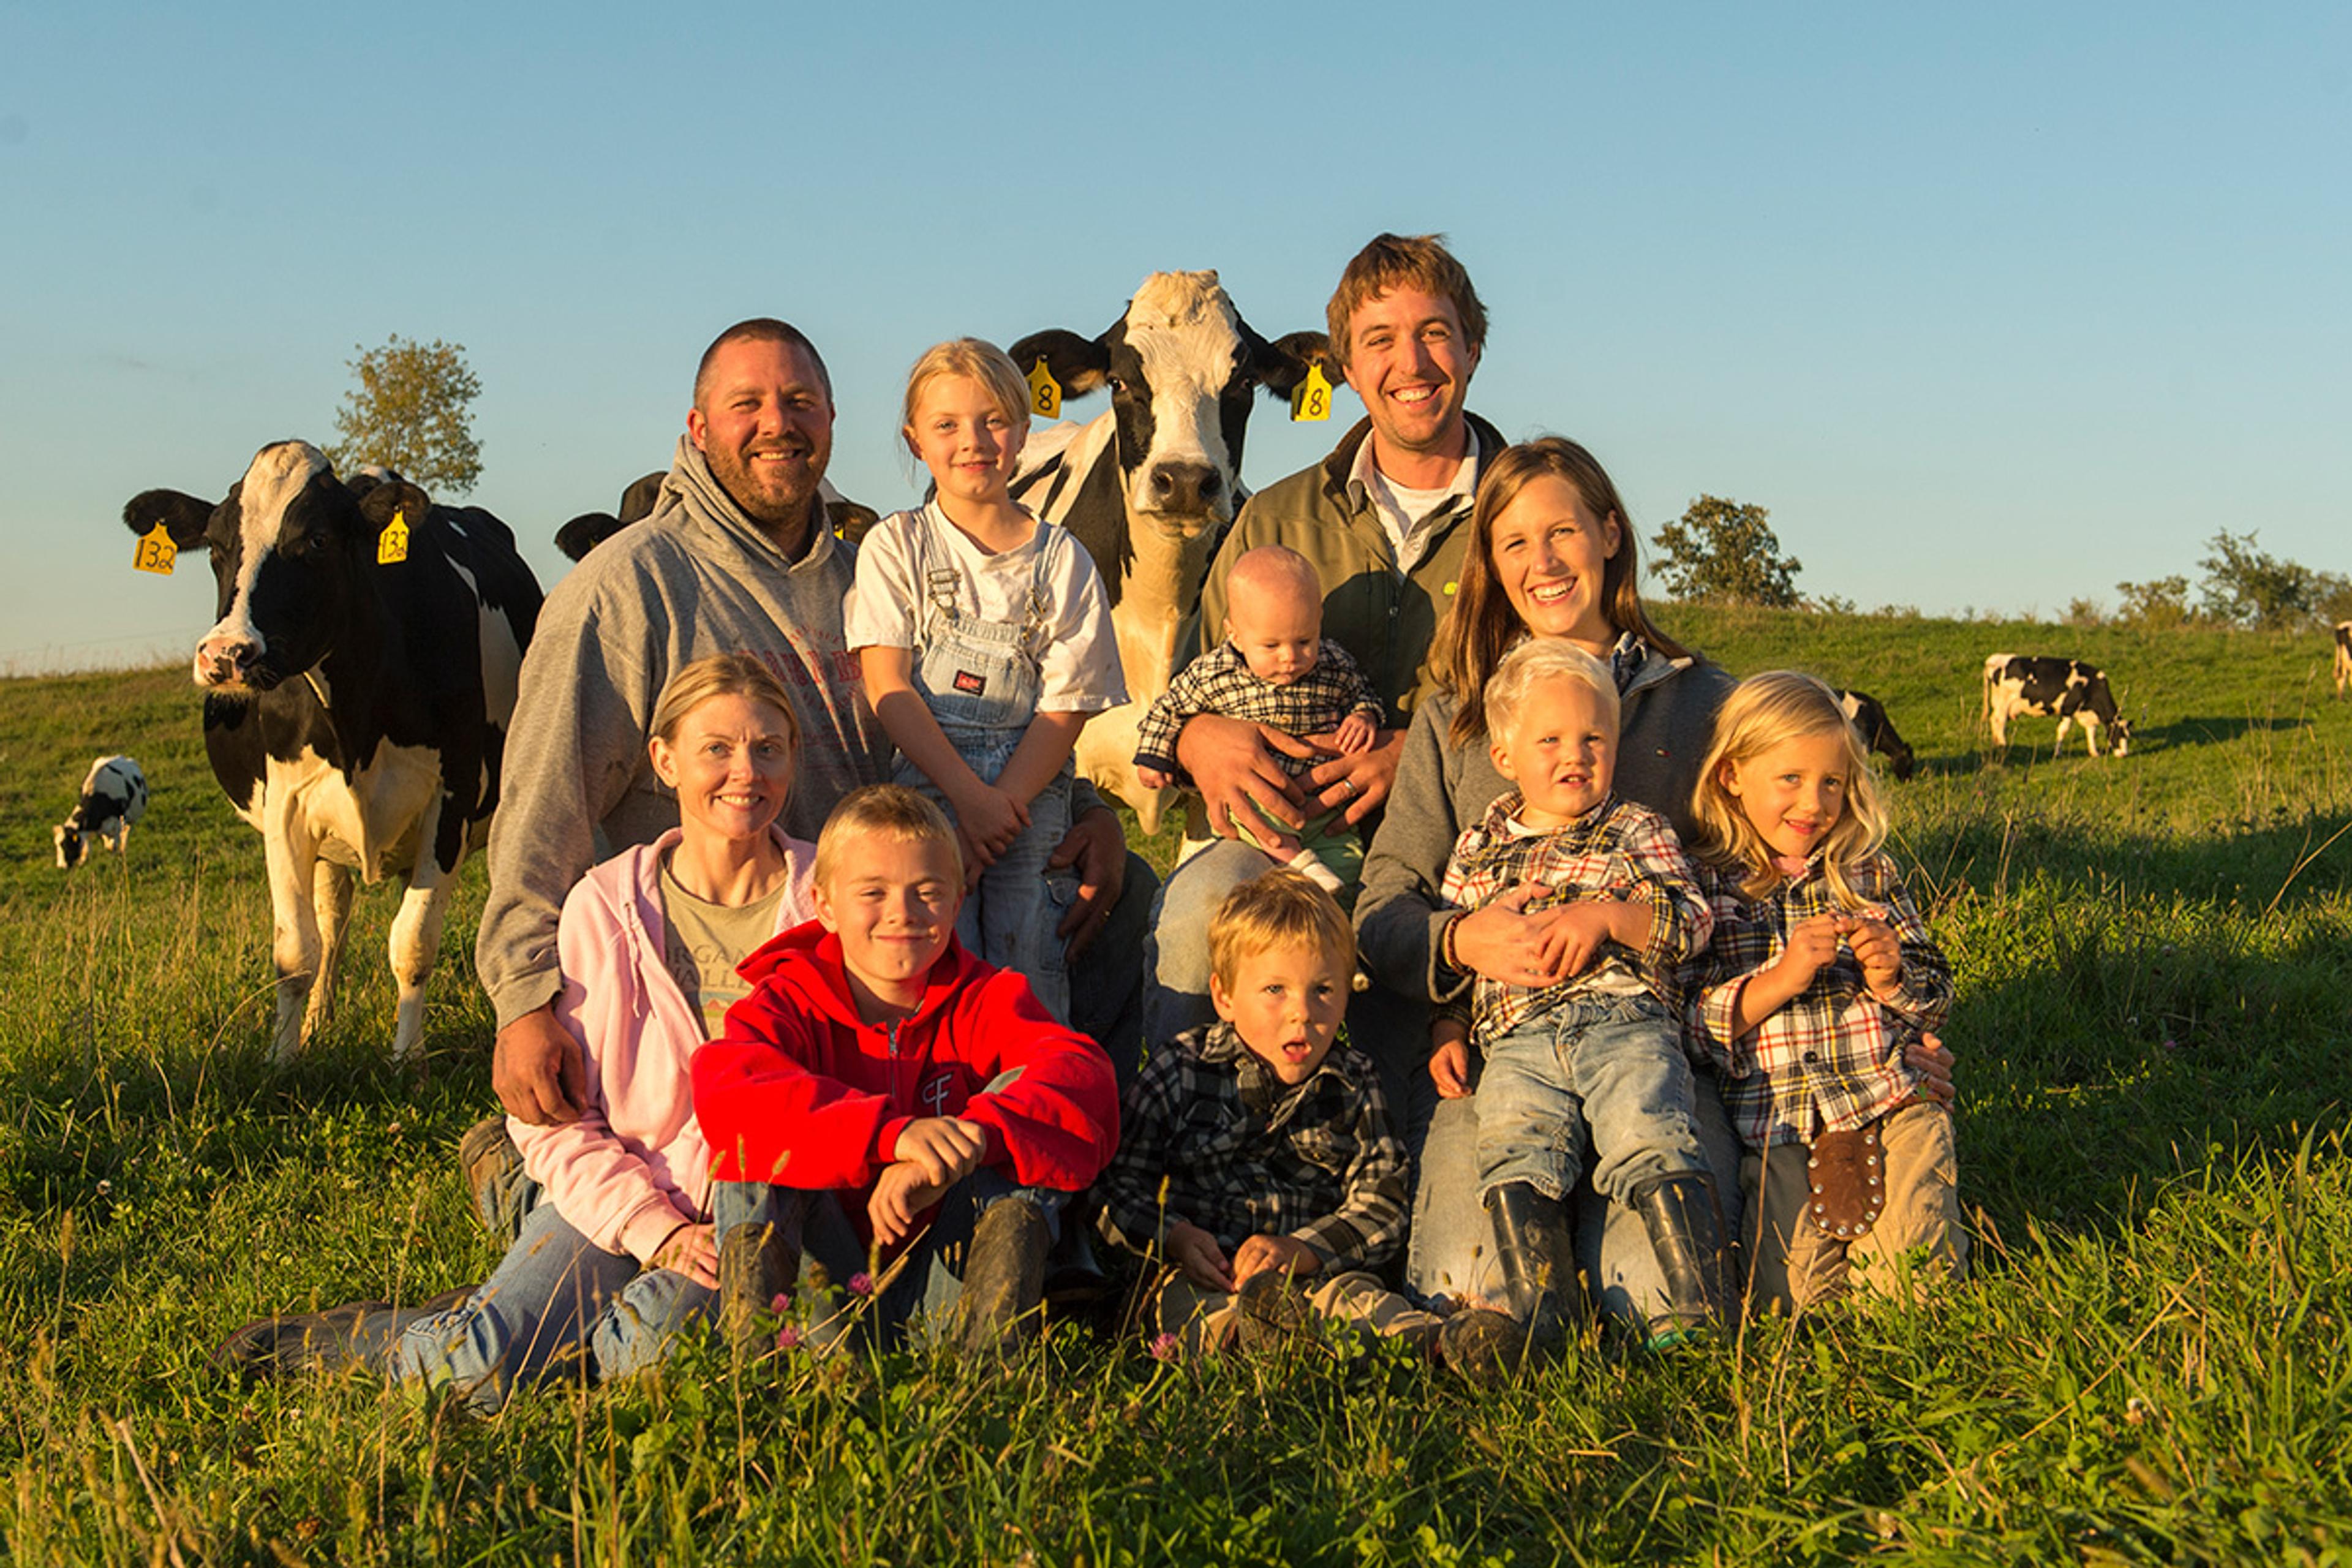 The O’Reilly family pose in a green pasture with cows and blue sky in the background.